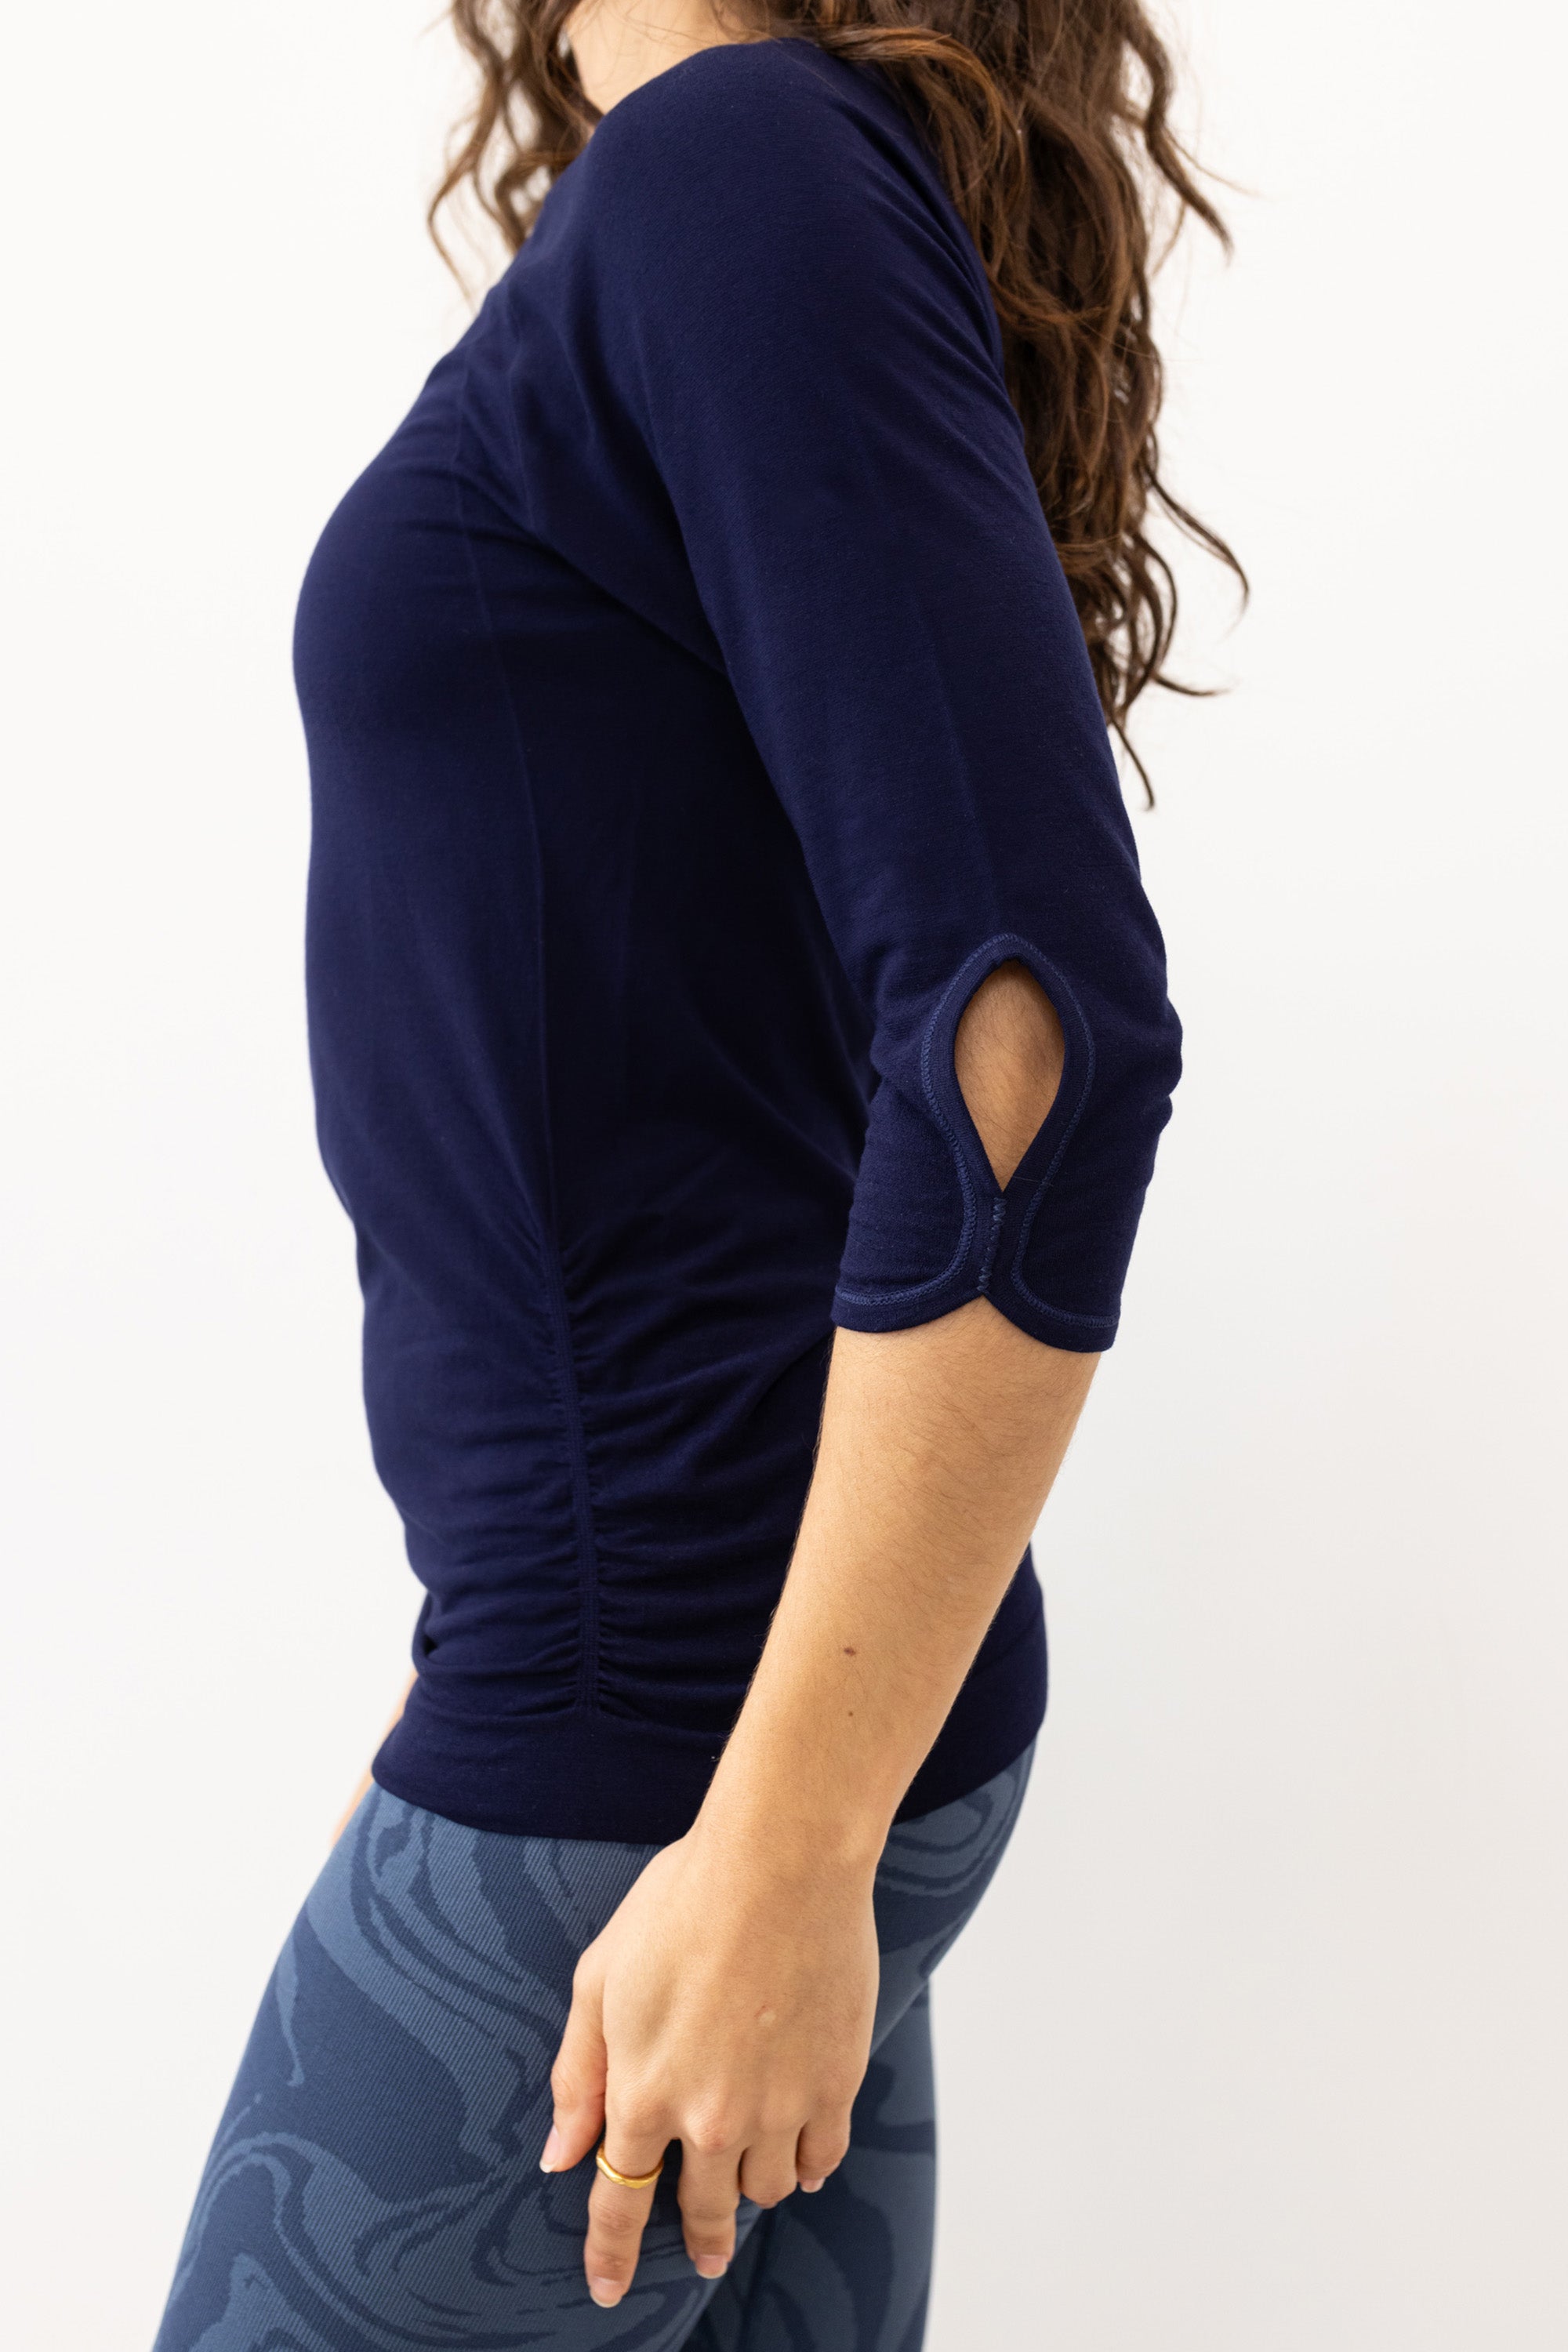 Navy blue soft bamboo 3/4 sleeve performance round neck top with side ruching for yoga, pilates, running and exercise by sustainable activewear brand Jilla Active. 